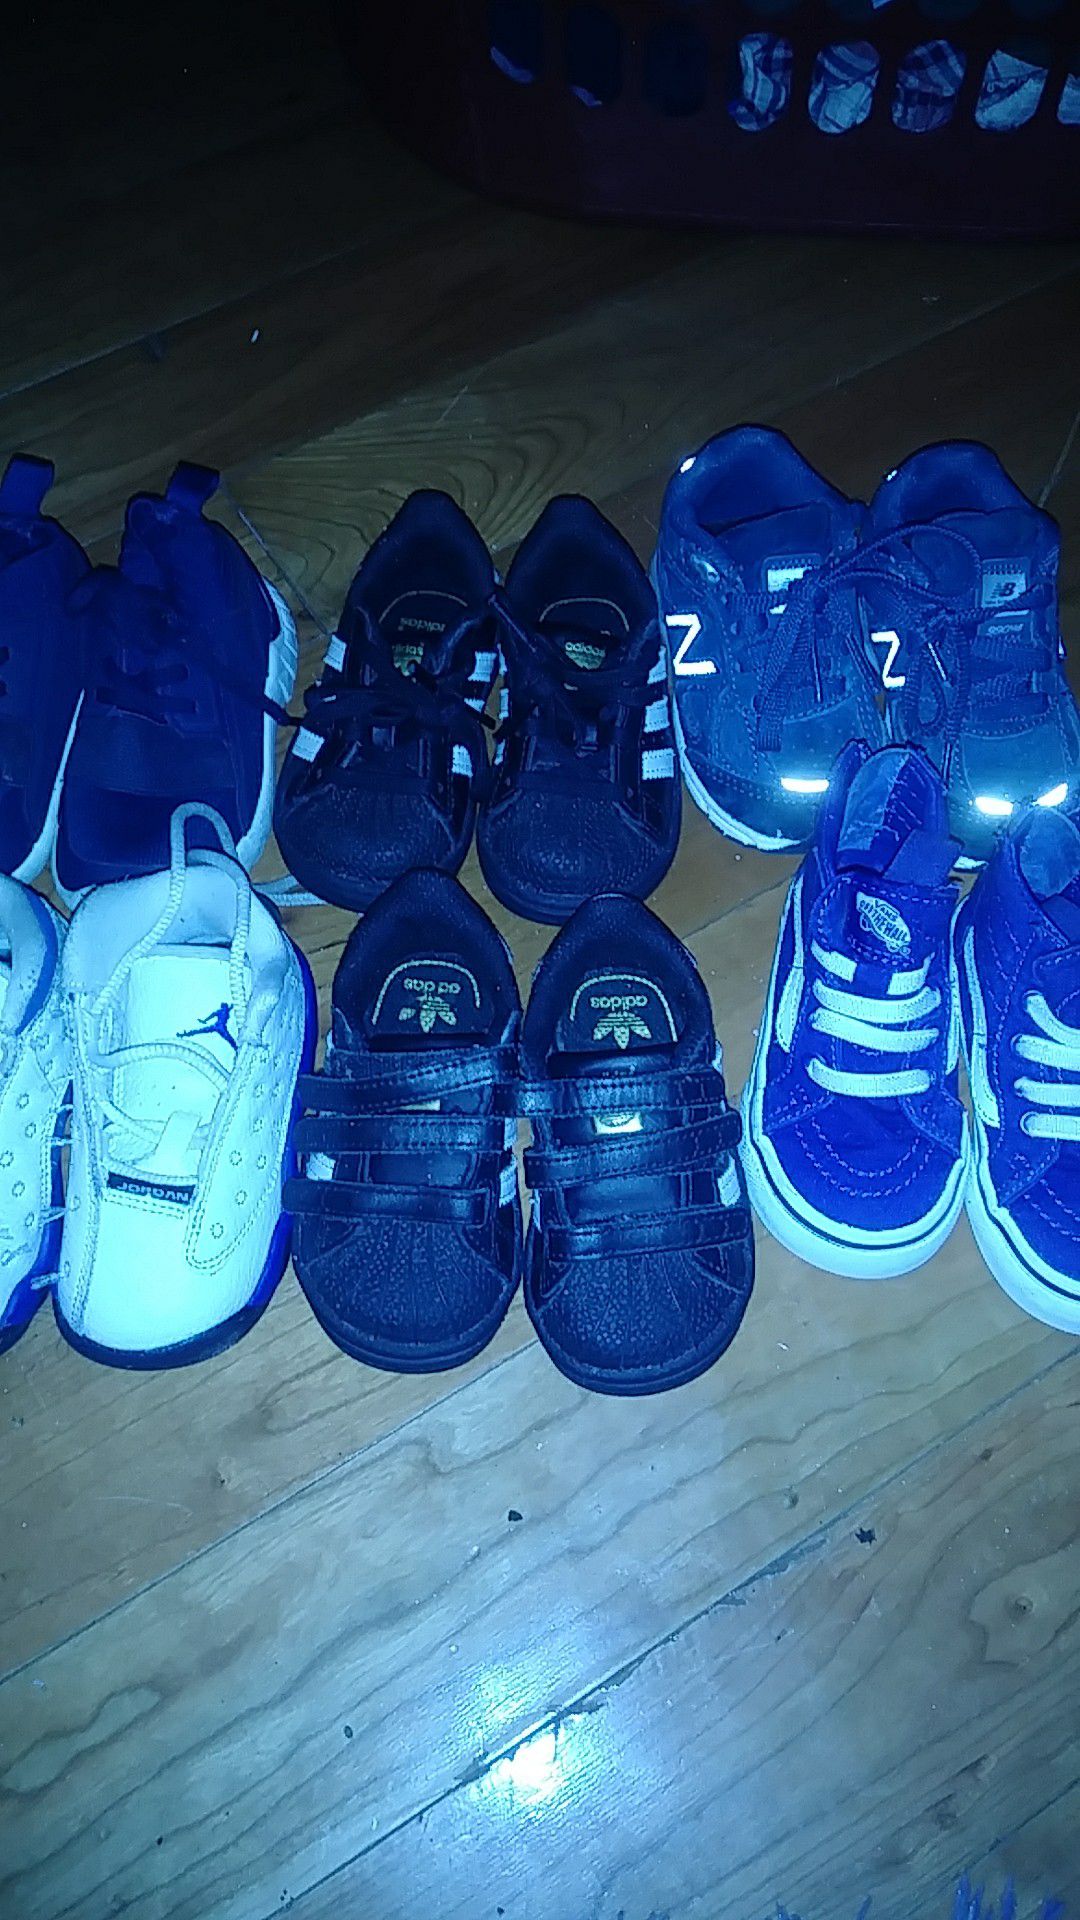 6 pairs of shoes toddler size 4